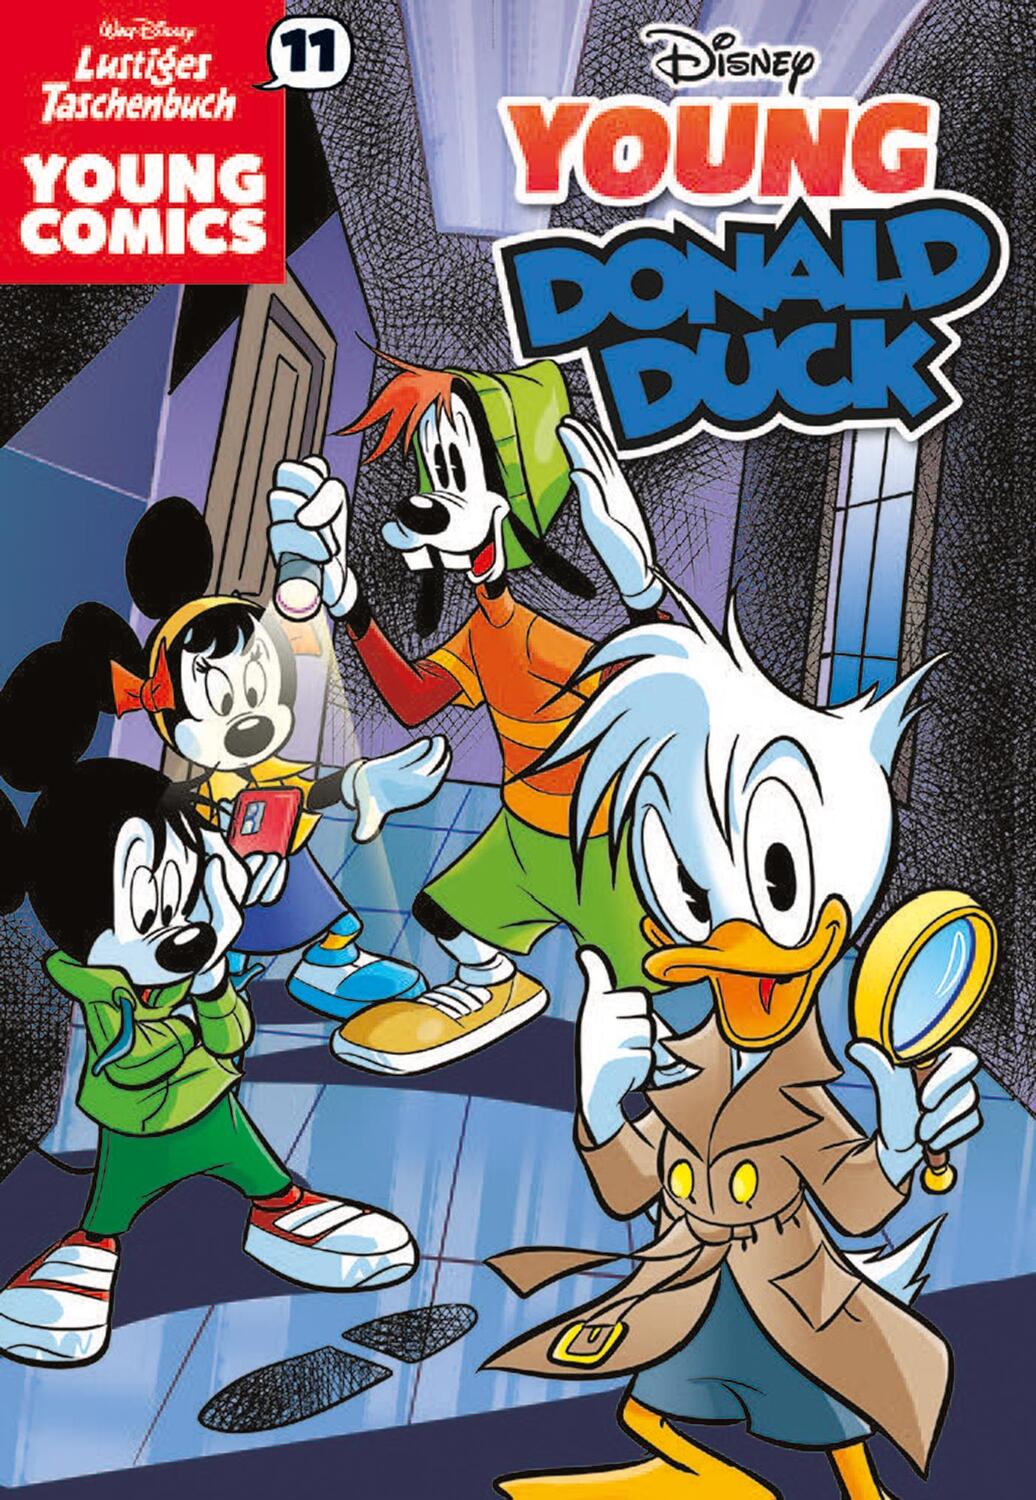 Cover: 9783841321114 | Lustiges Taschenbuch Young Comics 11 | Young Donald Duck | Disney